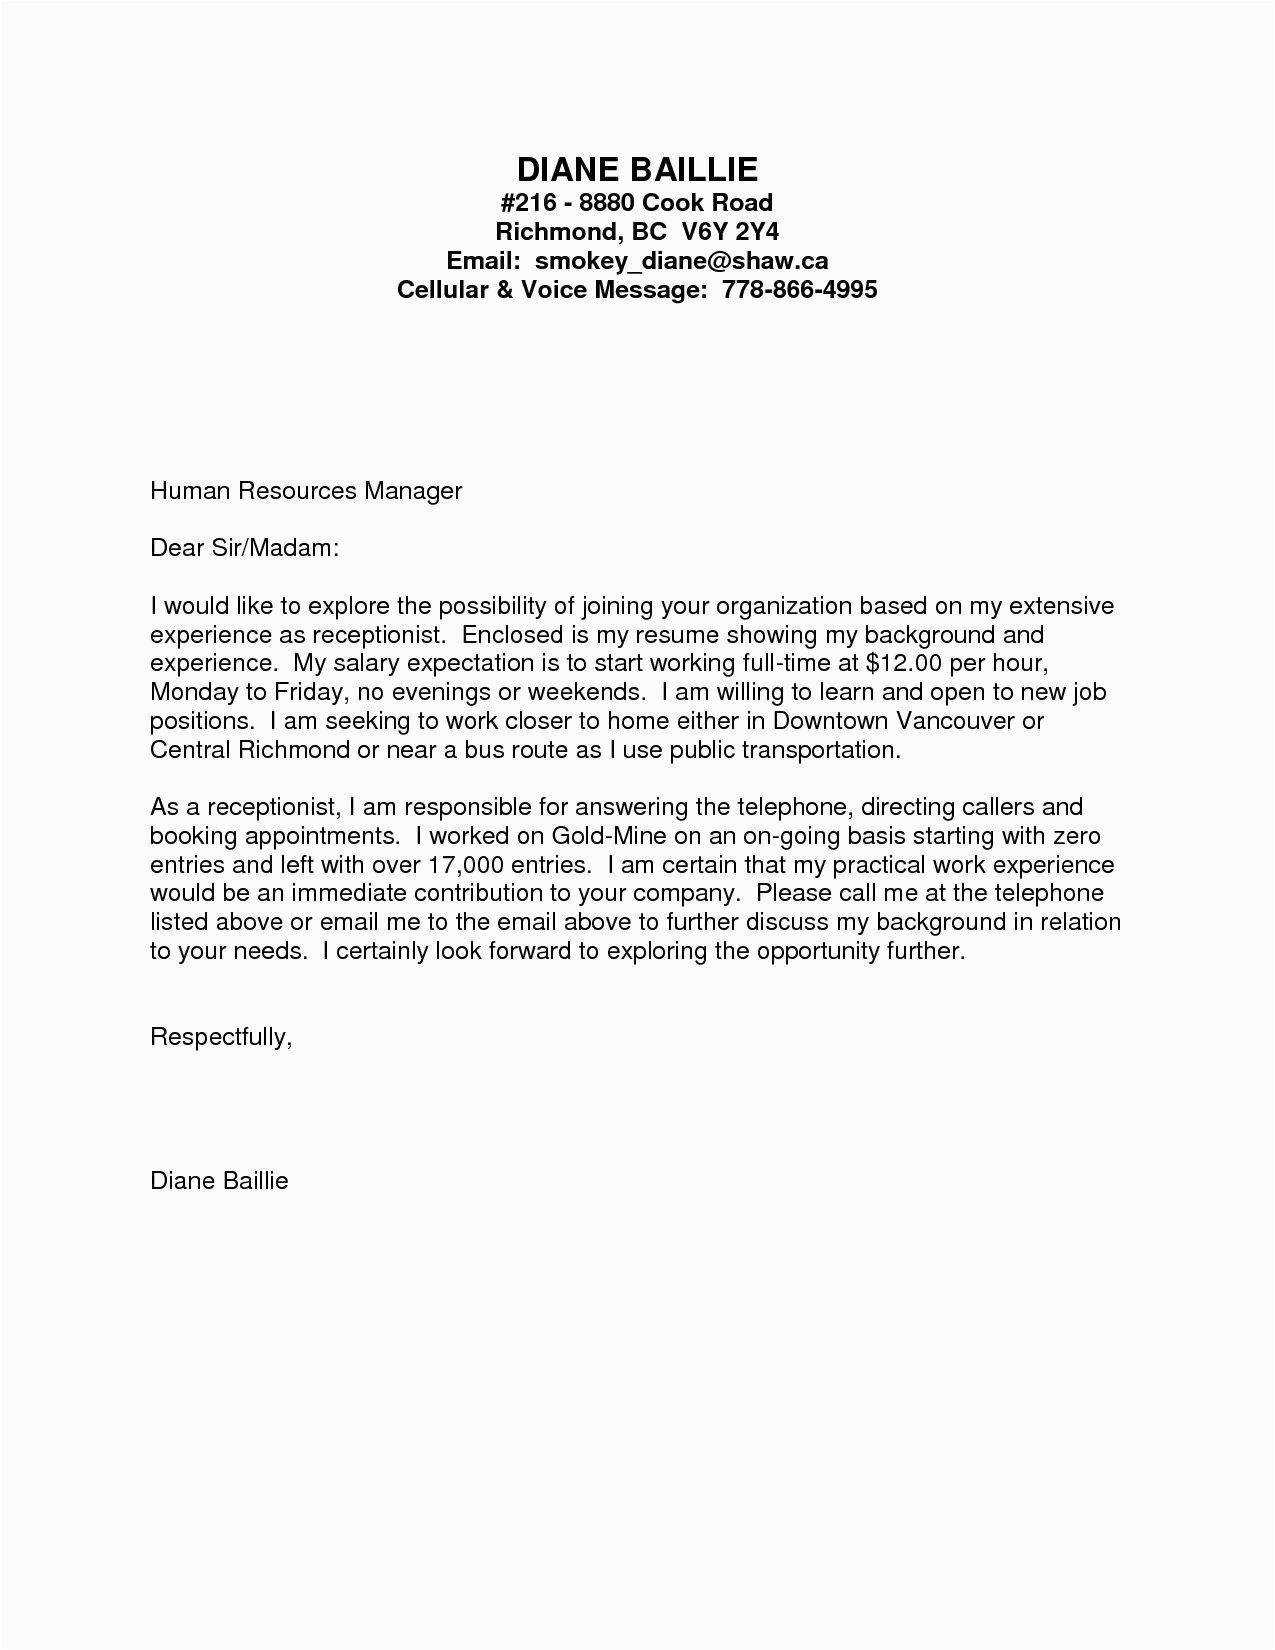 Resume Cover Letter Samples with No Experience Volunteer Cover Letter No Experience